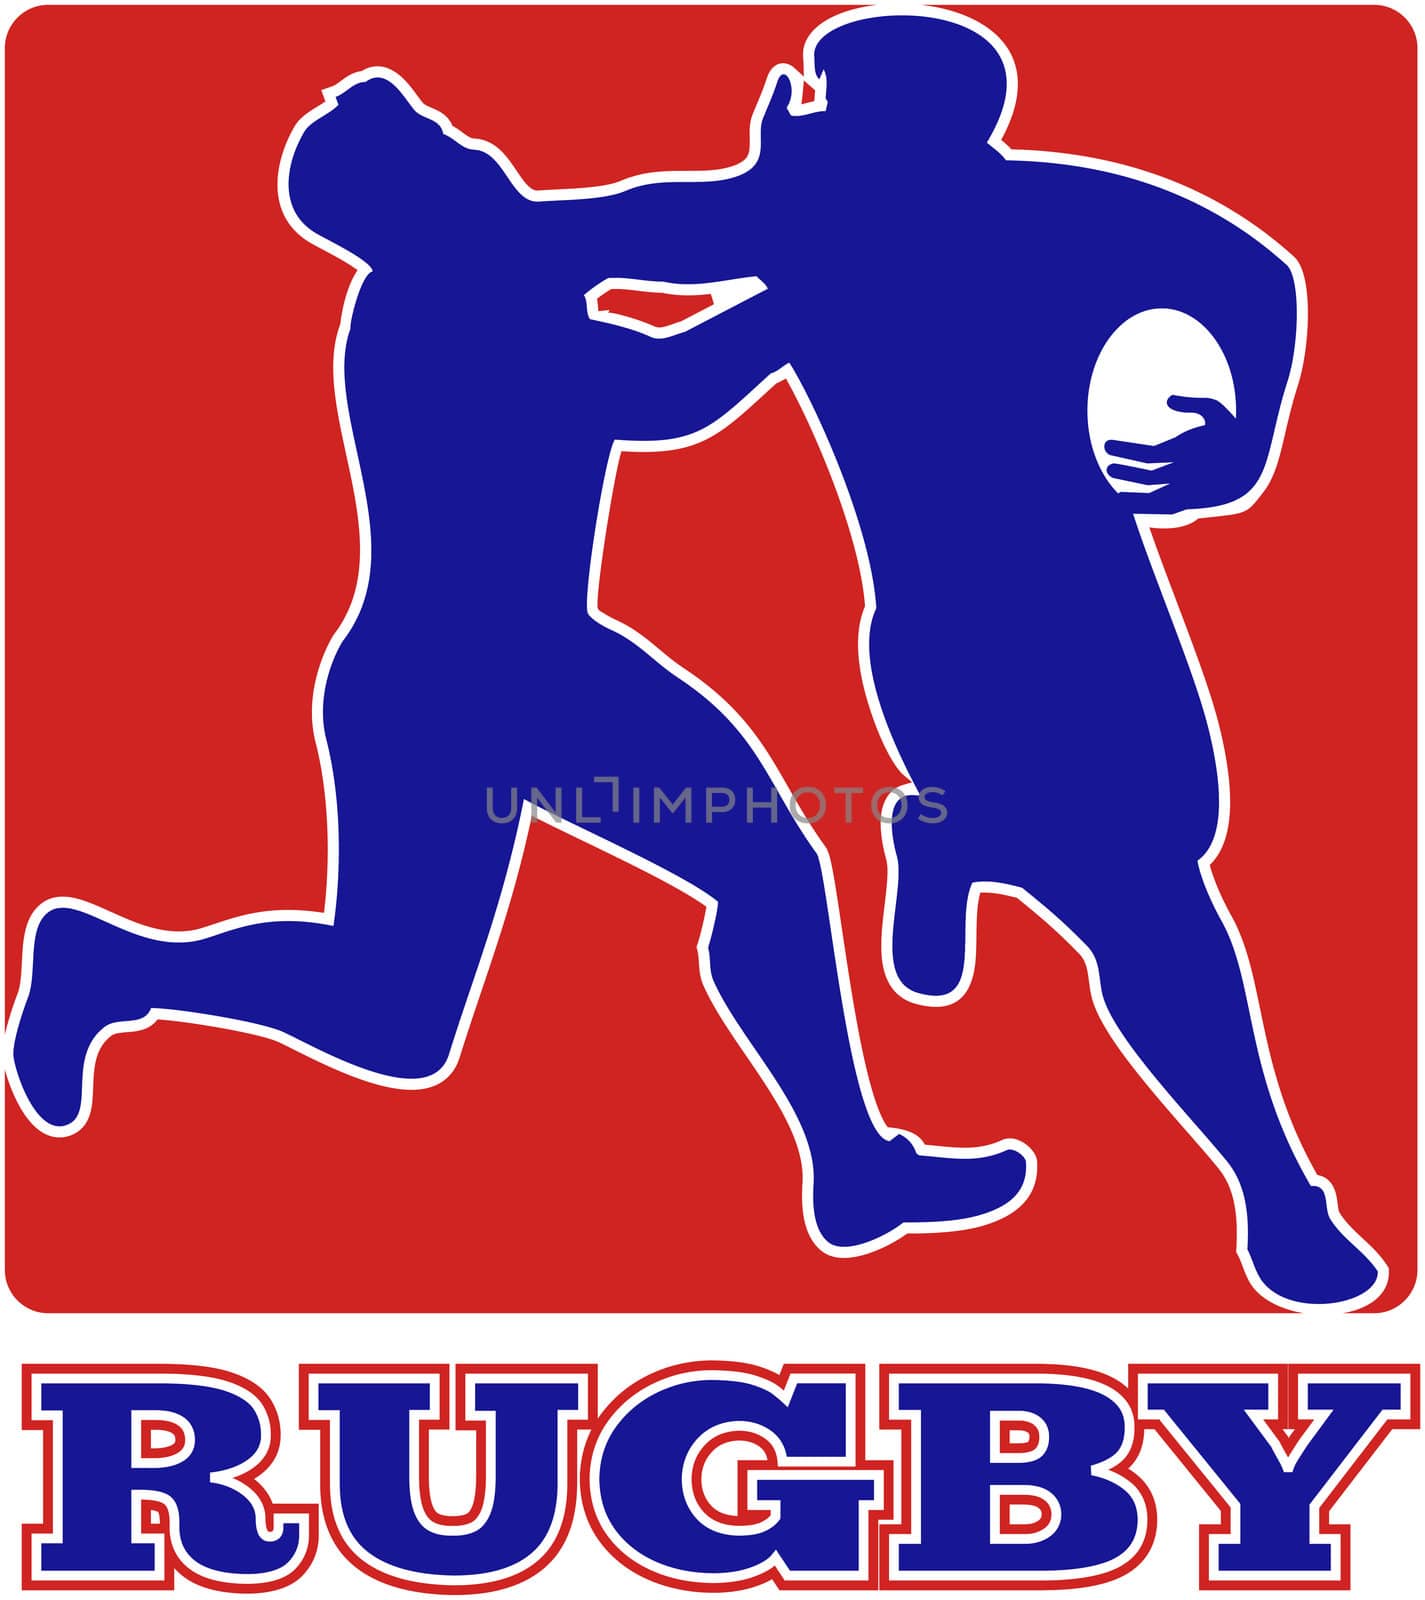 illustration of a Rugby player running fending off tackle with square shape in background 